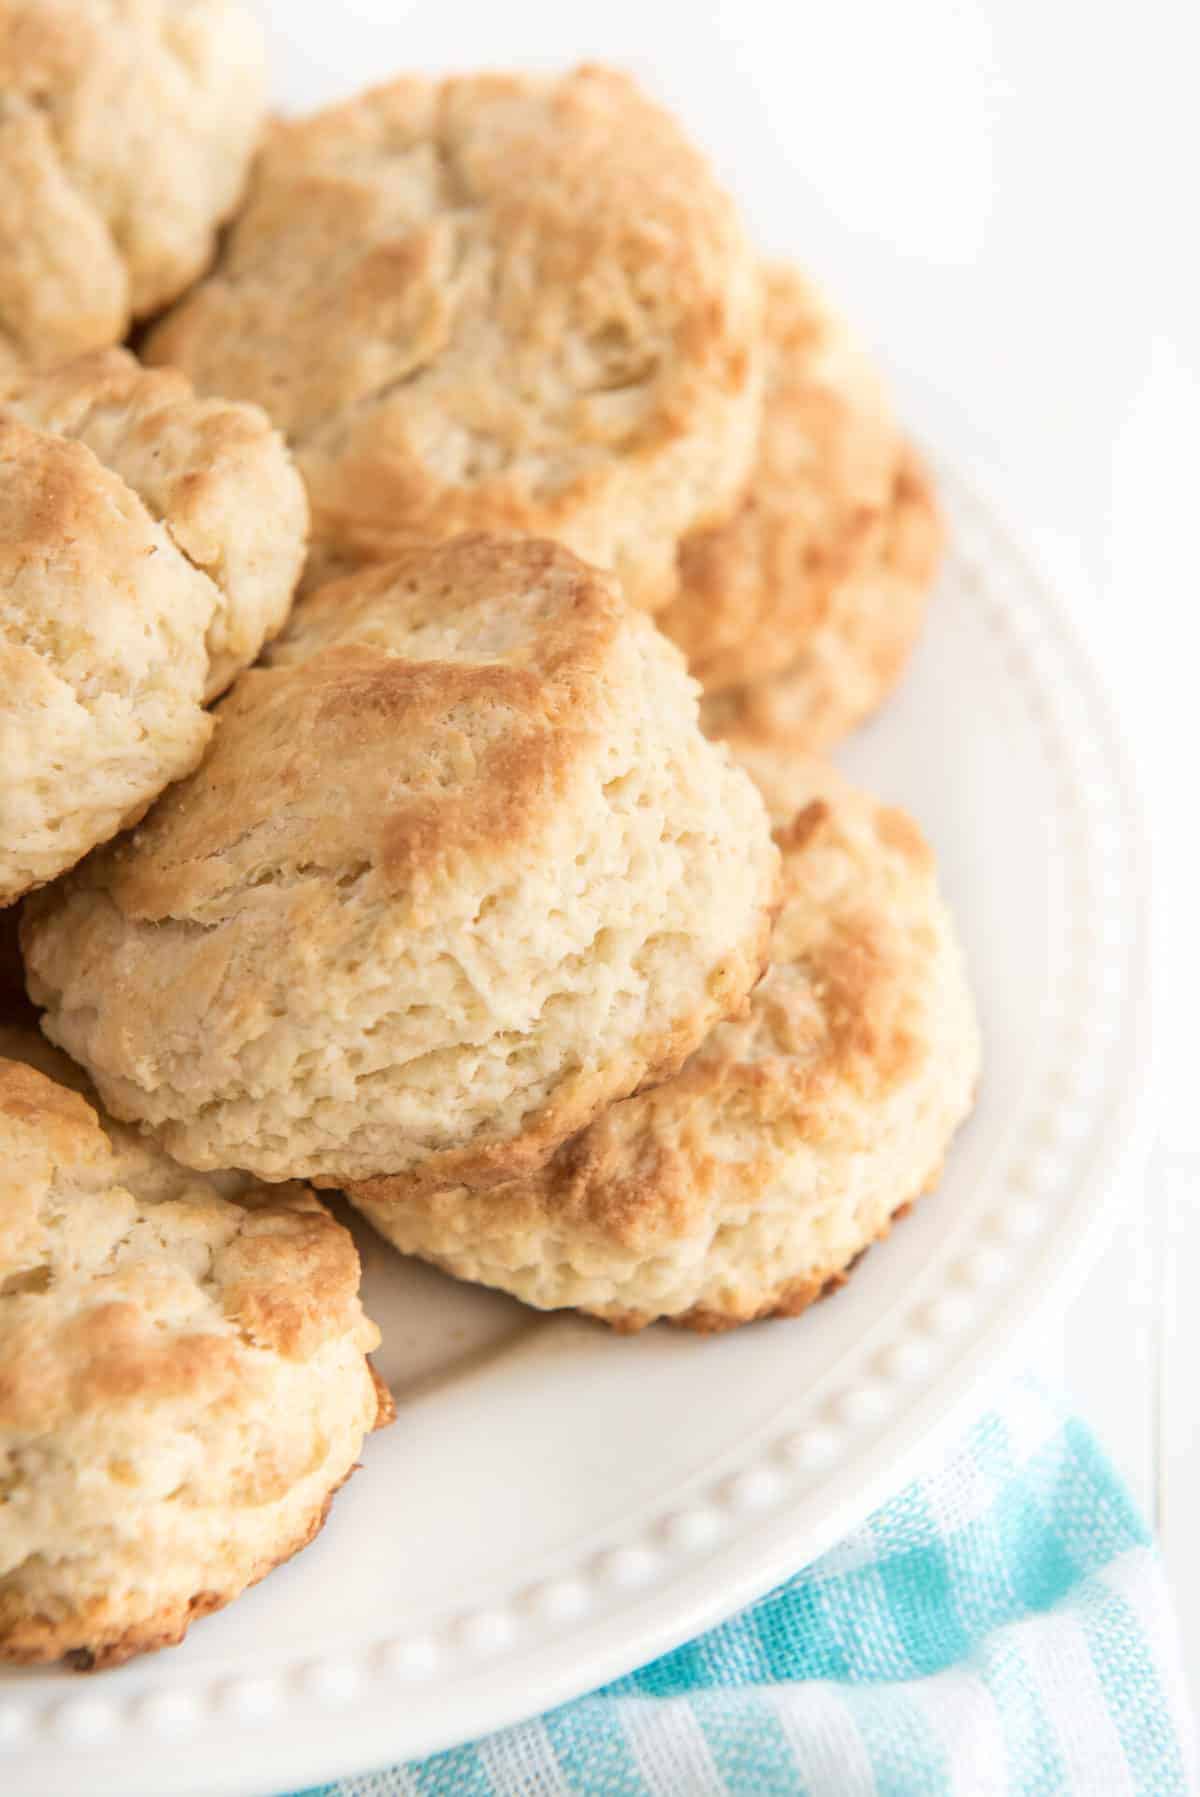 The best butter biscuit recipe EVER, perfect for lazy mornings lounging around the house when all you want is a cozy, comforting breakfast! This is a no-fuss recipe with simple instructions that anyone can make with ease, and they come out fluffy and flaky every time. #biscuits #butterbiscuits #biscuitrecipe #biscuit #homemadebiscuits